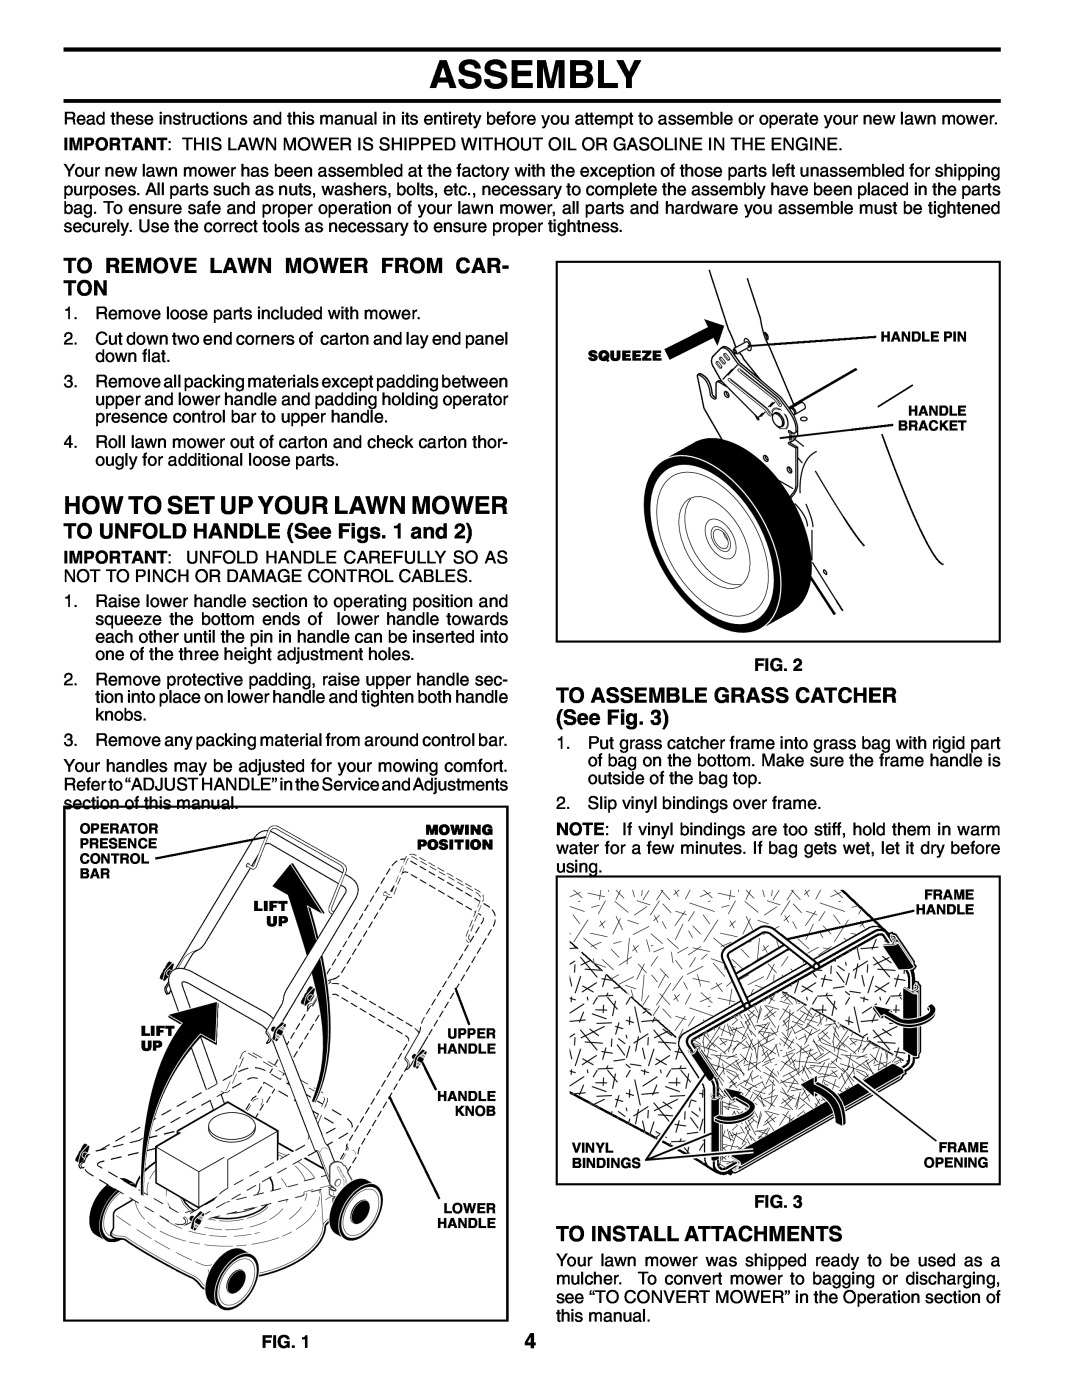 Husqvarna 7021RS Assembly, How To Set Up Your Lawn Mower, To Remove Lawn Mower From Car- Ton, To Install Attachments 